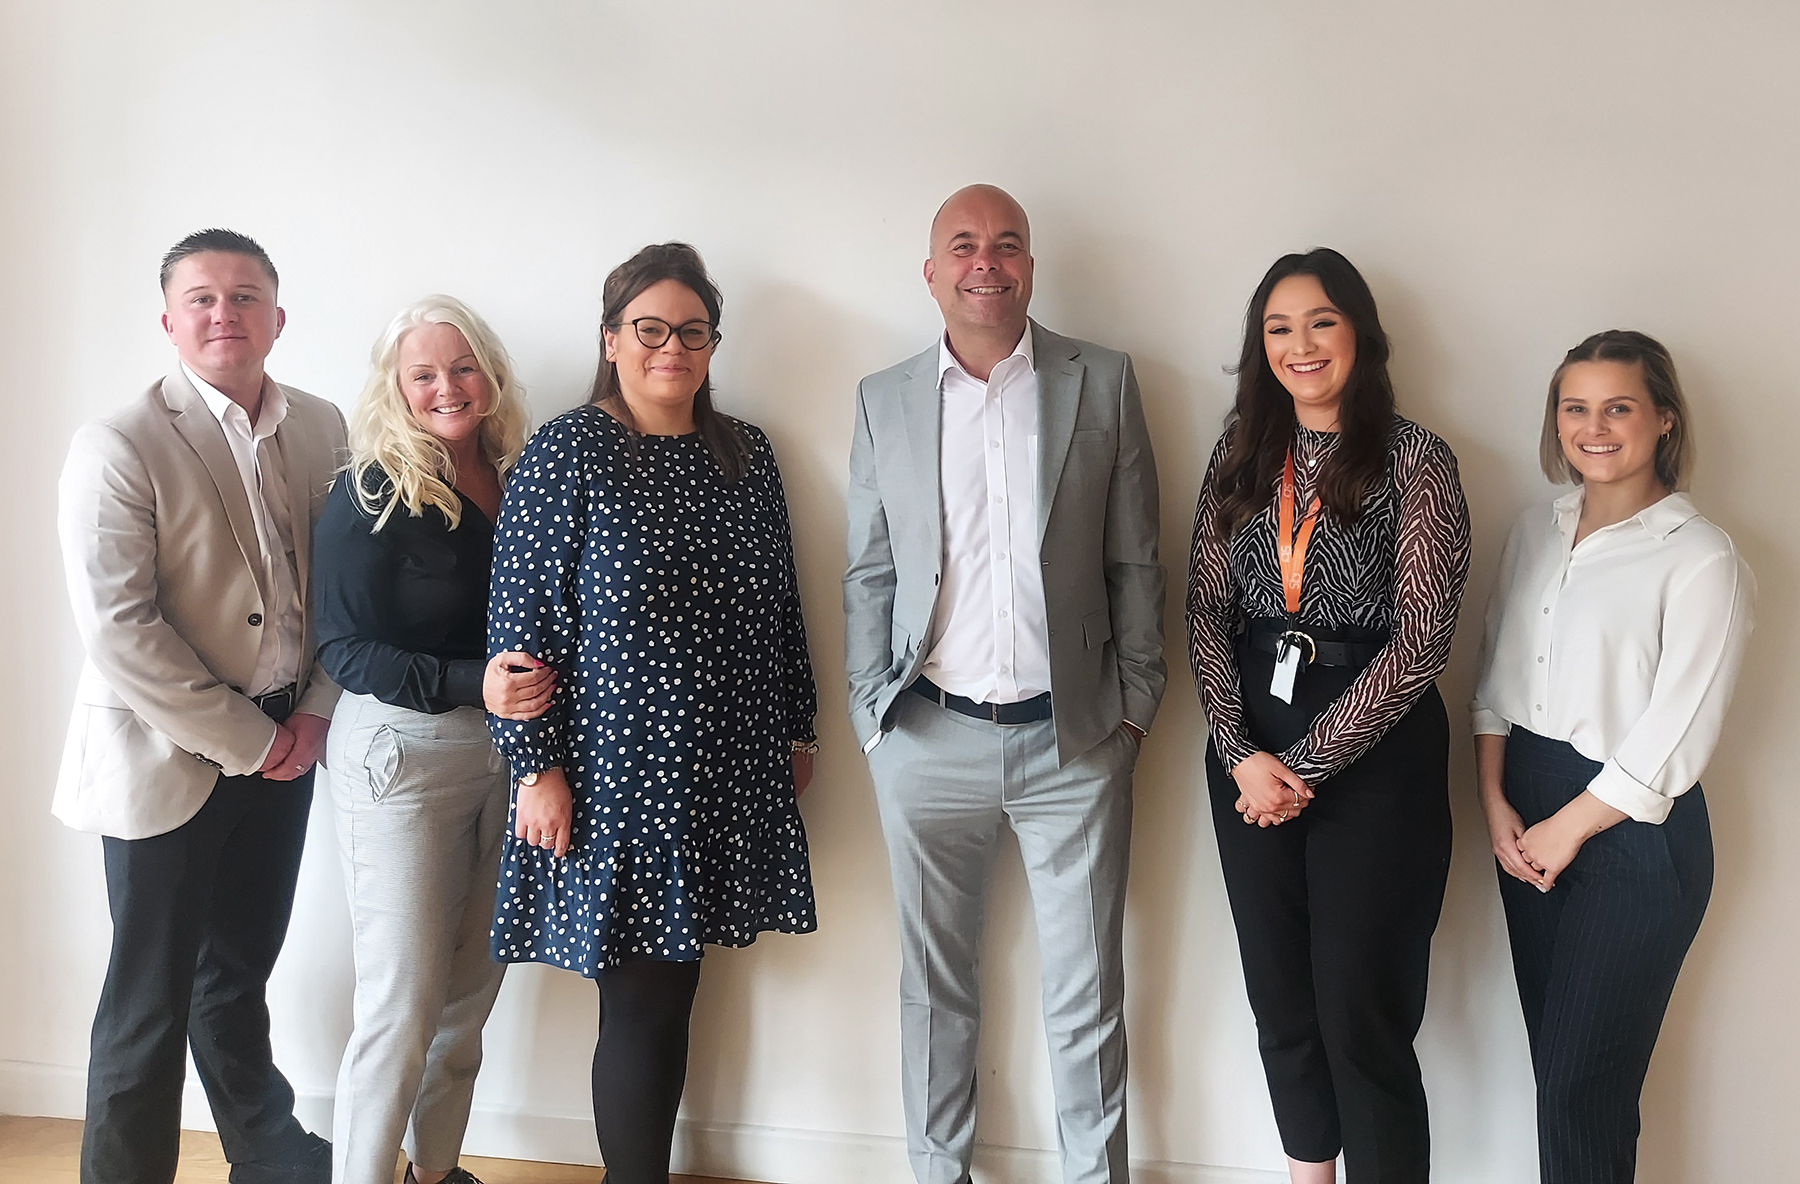 Recruitment firm opens latest office